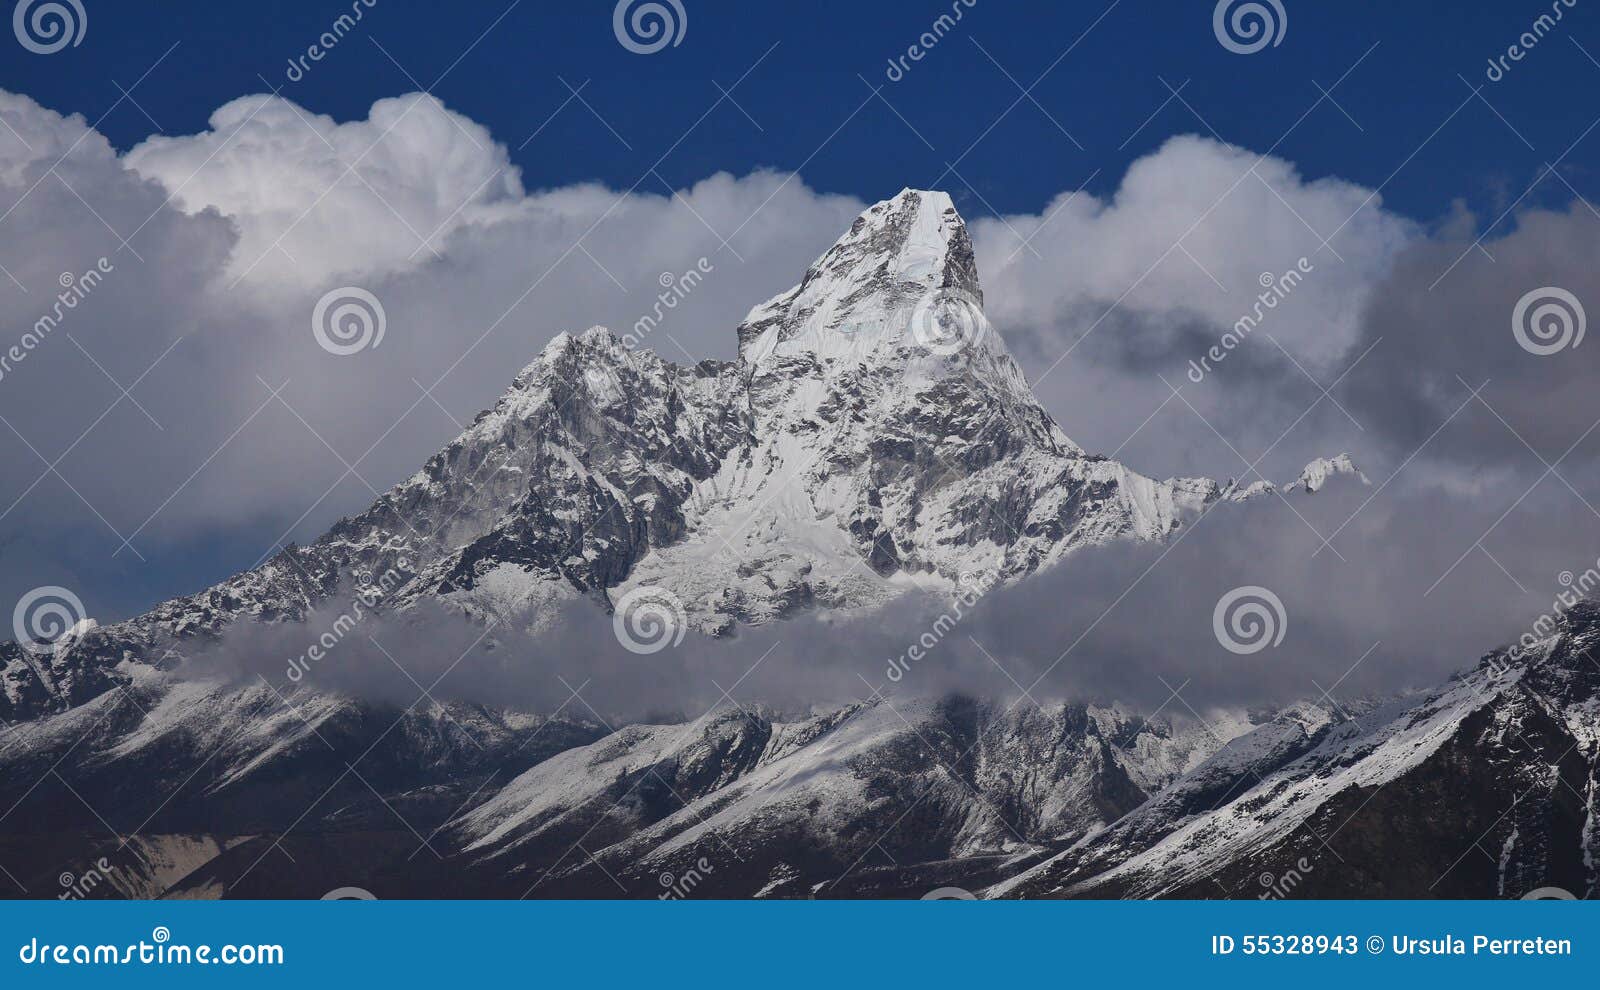 peak of ama dablam surrounded by clouds